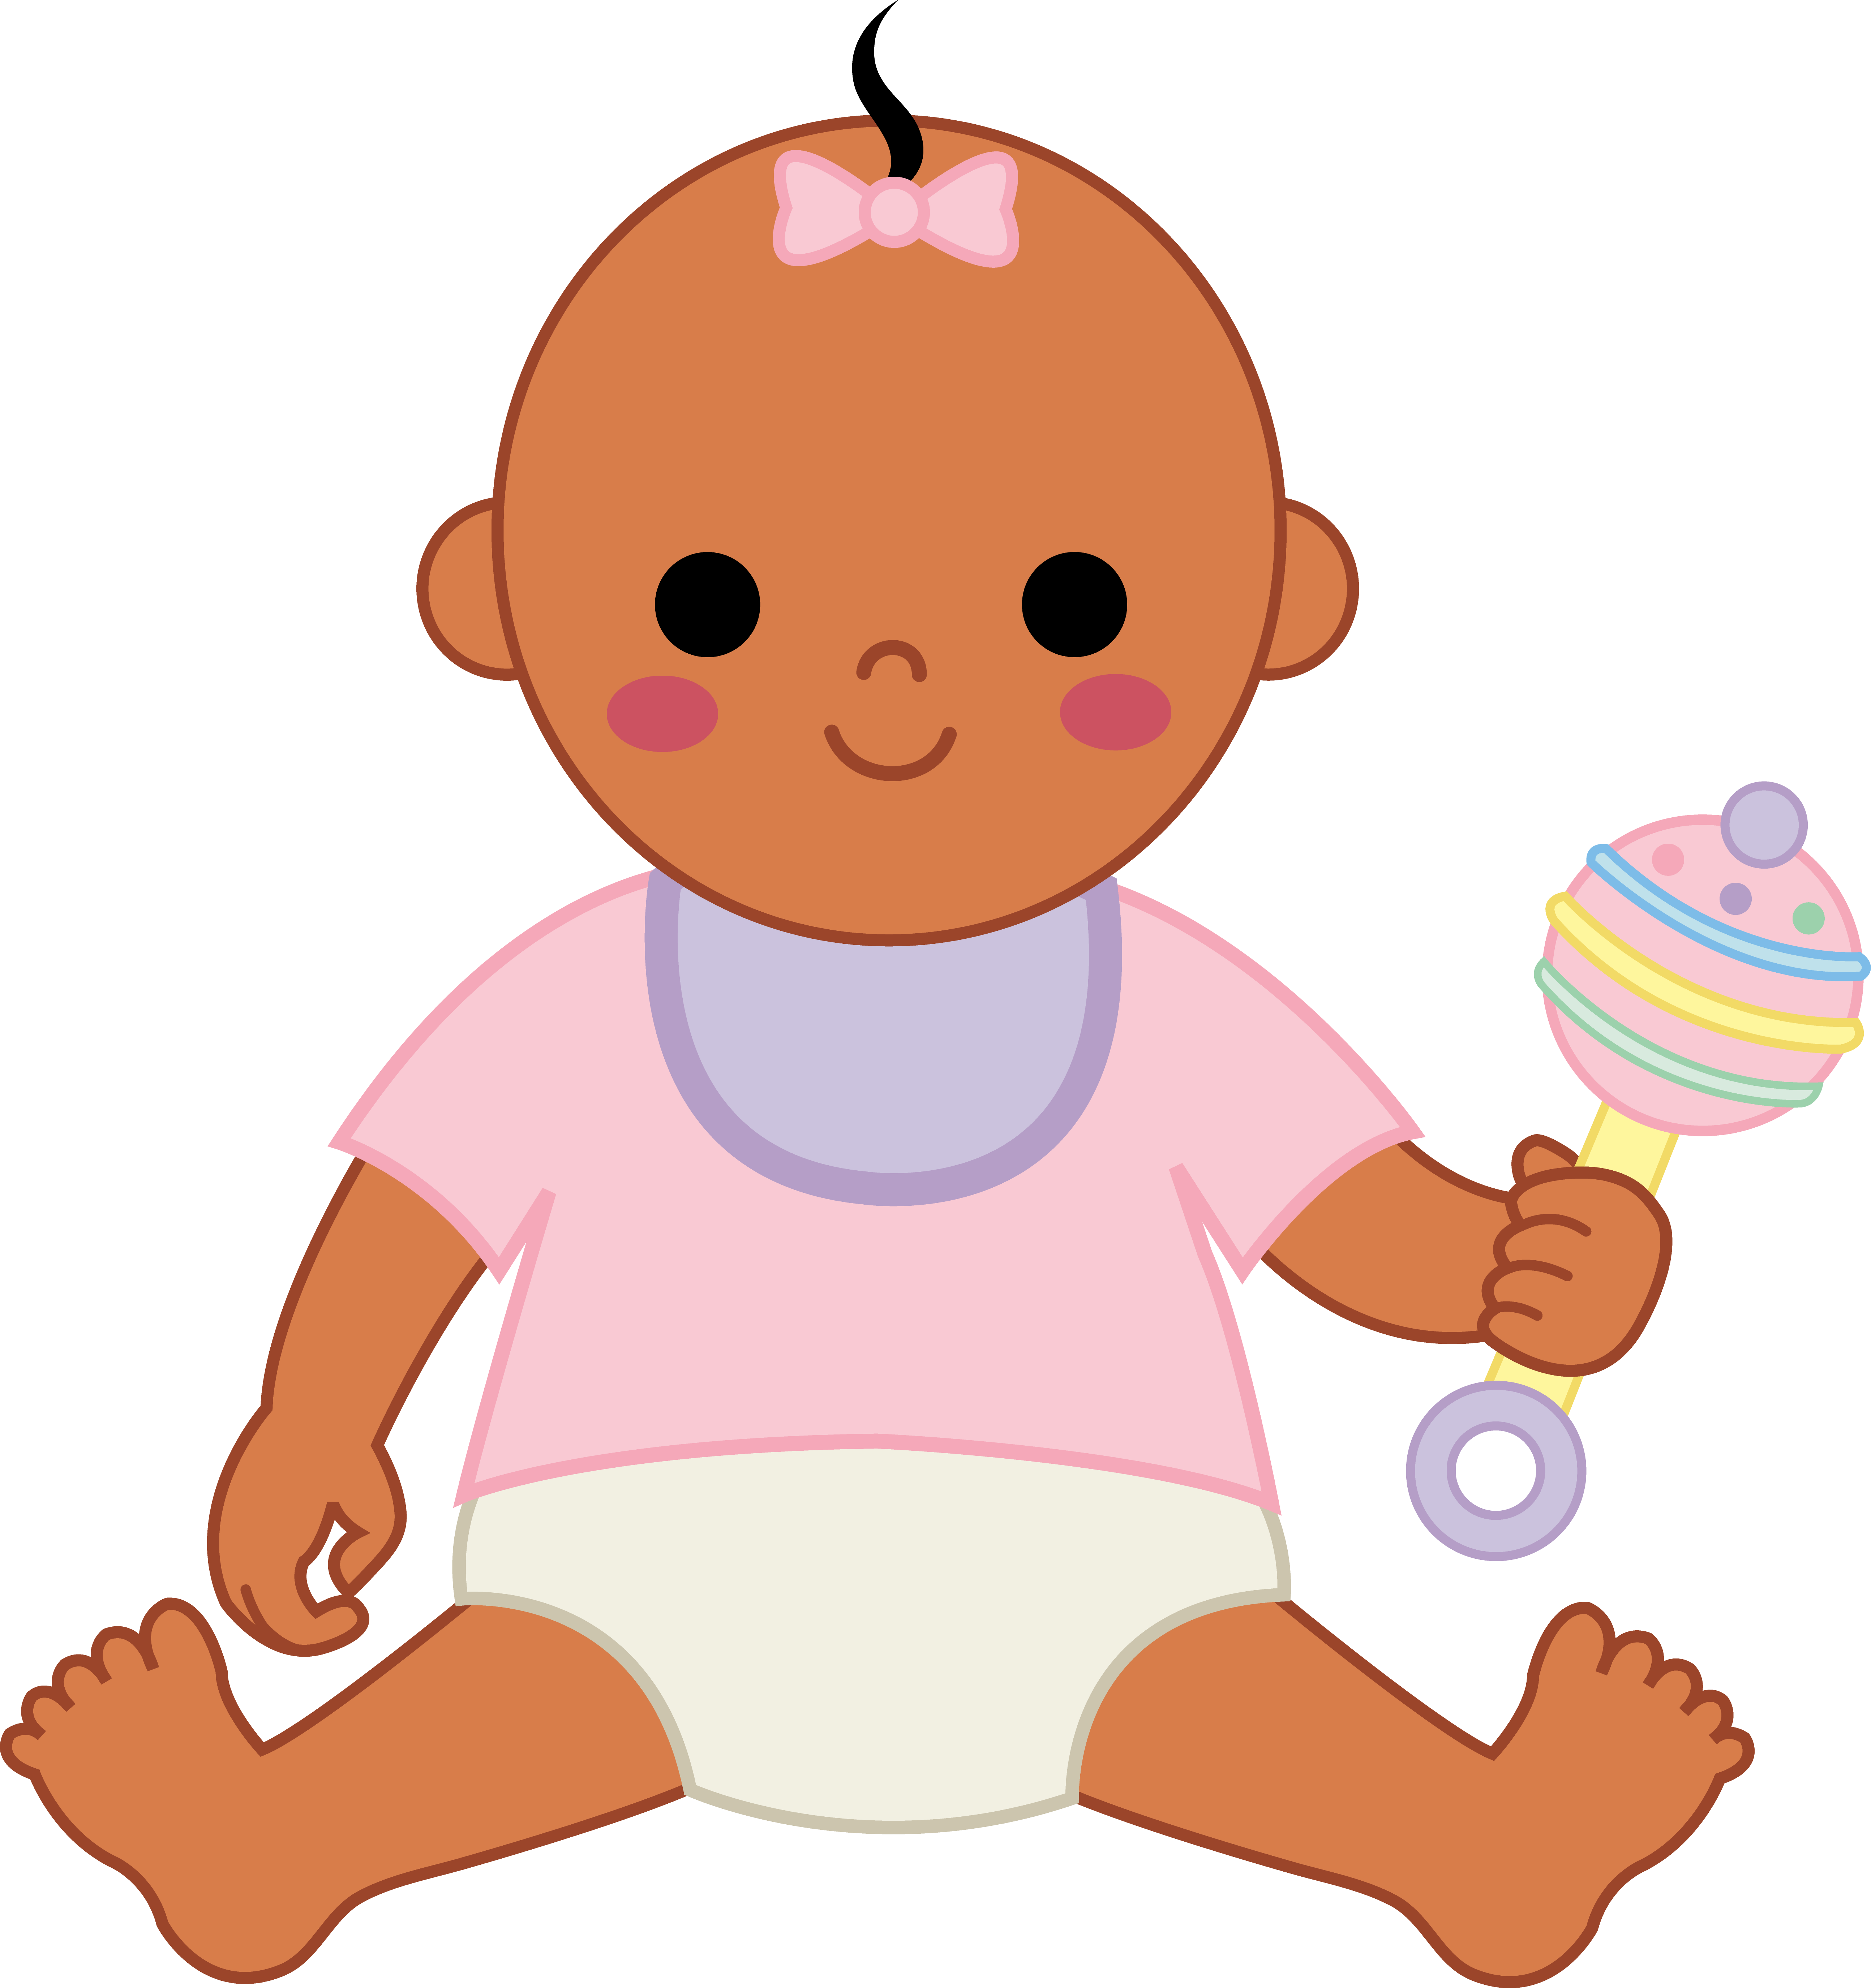 Picture Of A Cartoon Baby | Free Download Clip Art | Free Clip Art ...